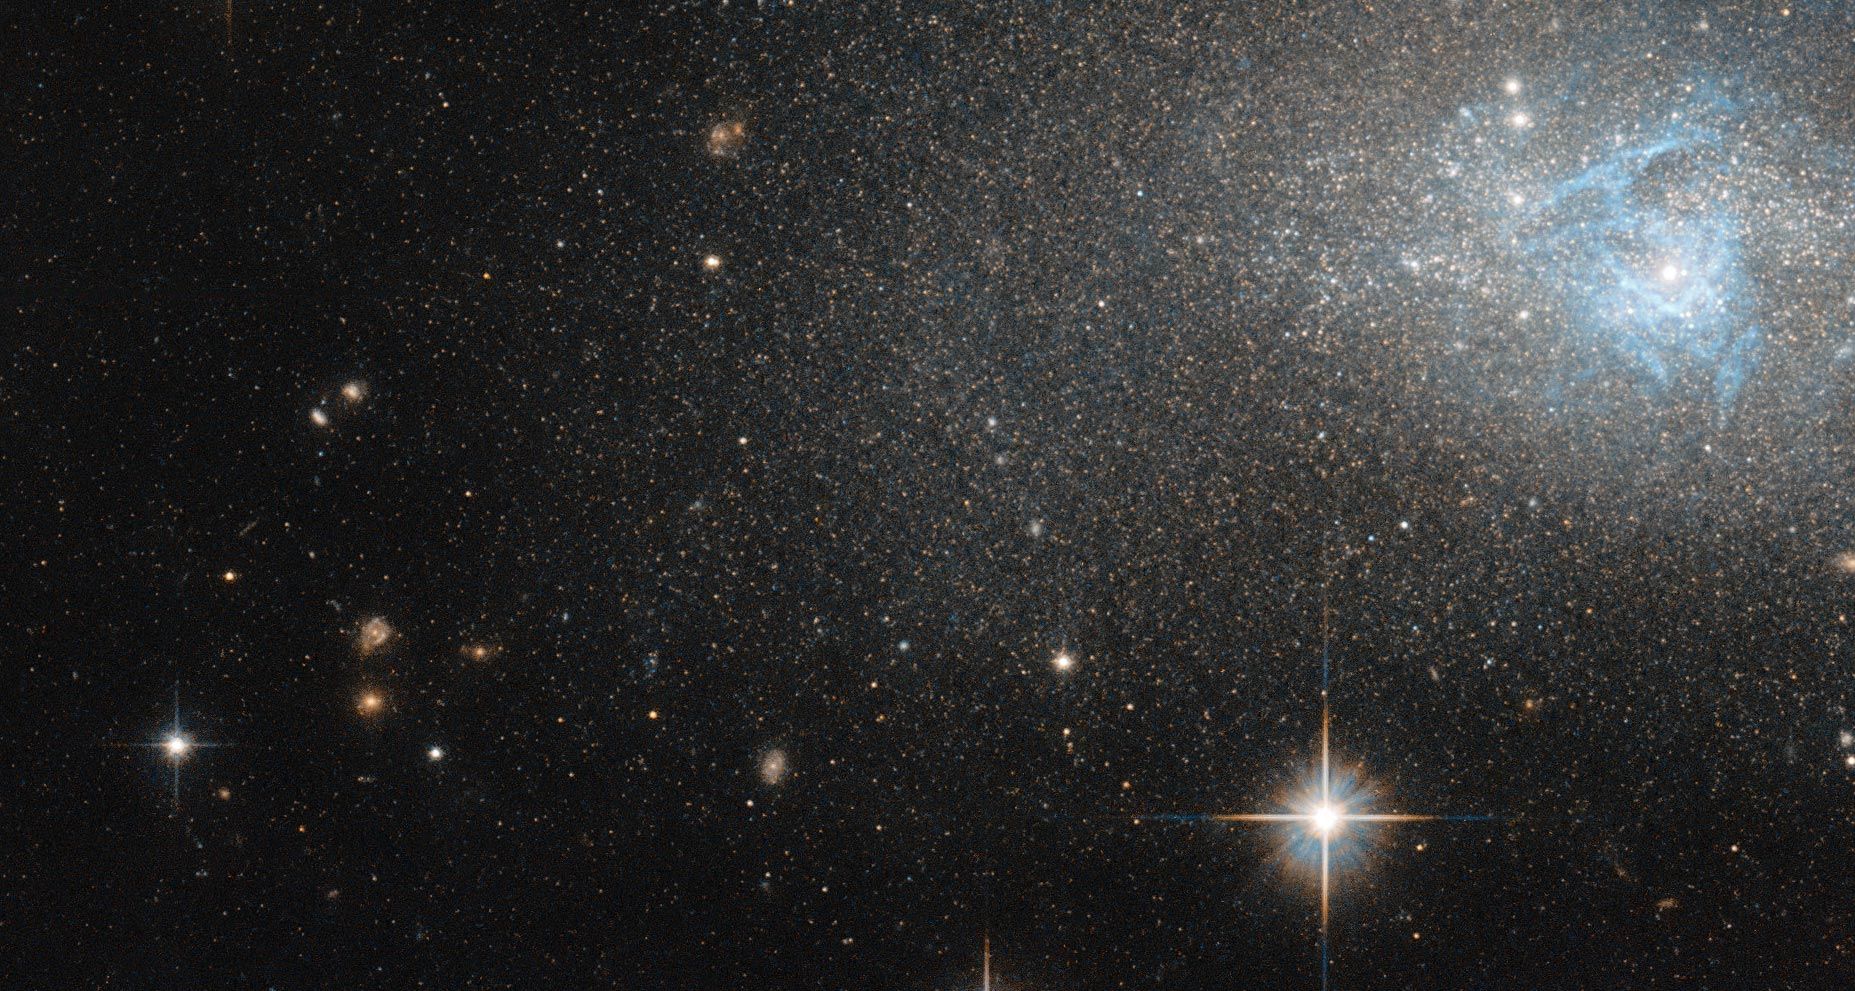 The dwarf galaxy IC 4870 is lovely in this Hubble image, but more information about it is scarce. Credit: ESA/Hubble & NASA